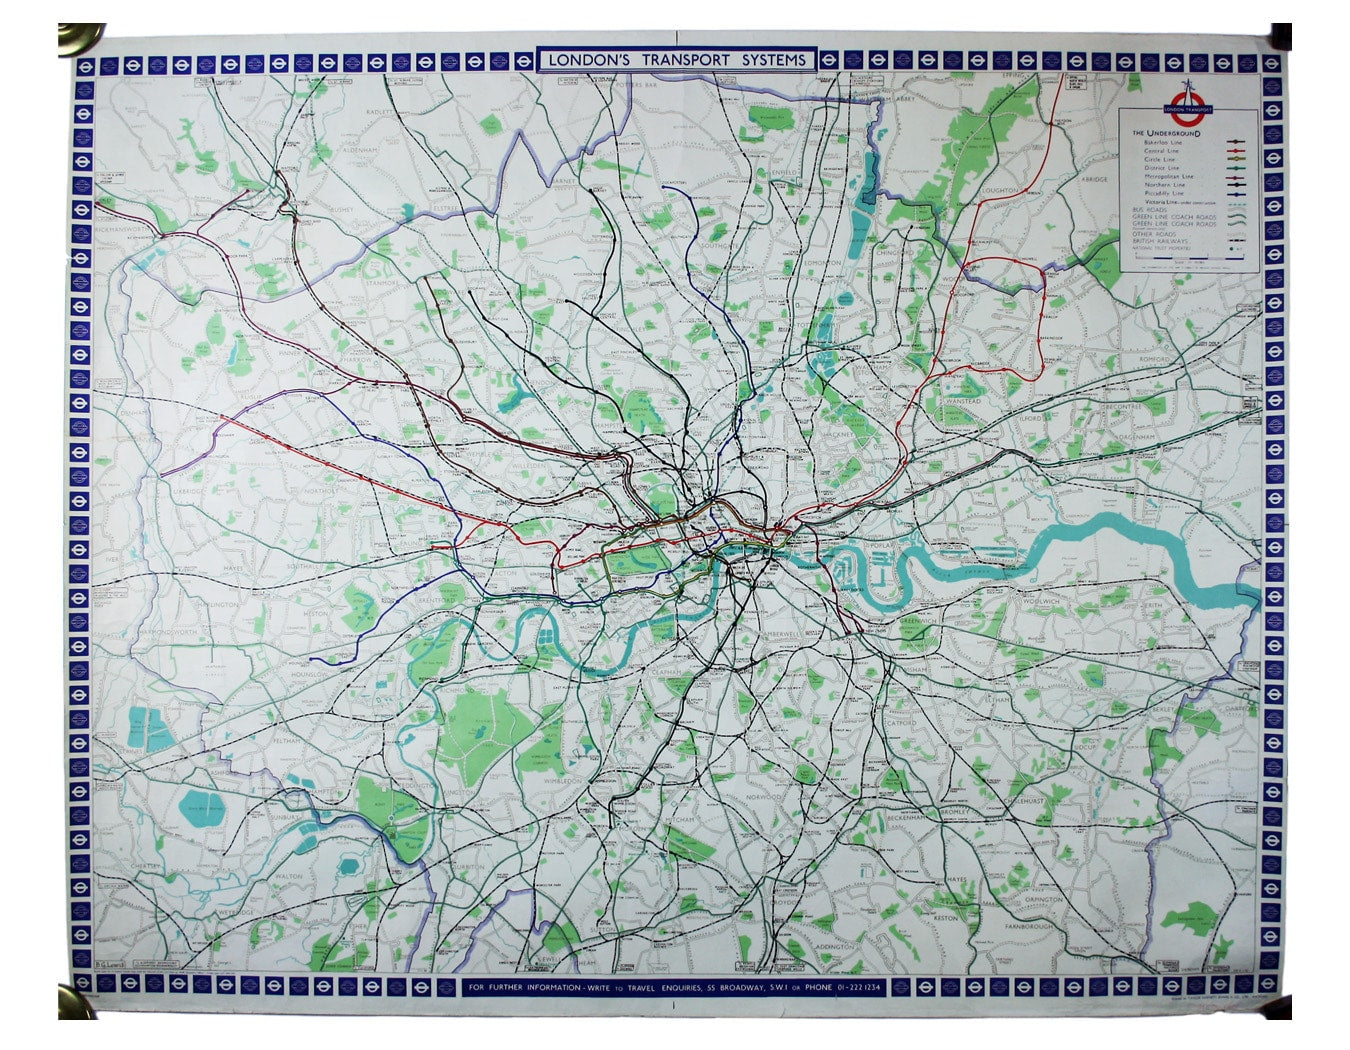 Lewis’ Map of the London Transport System